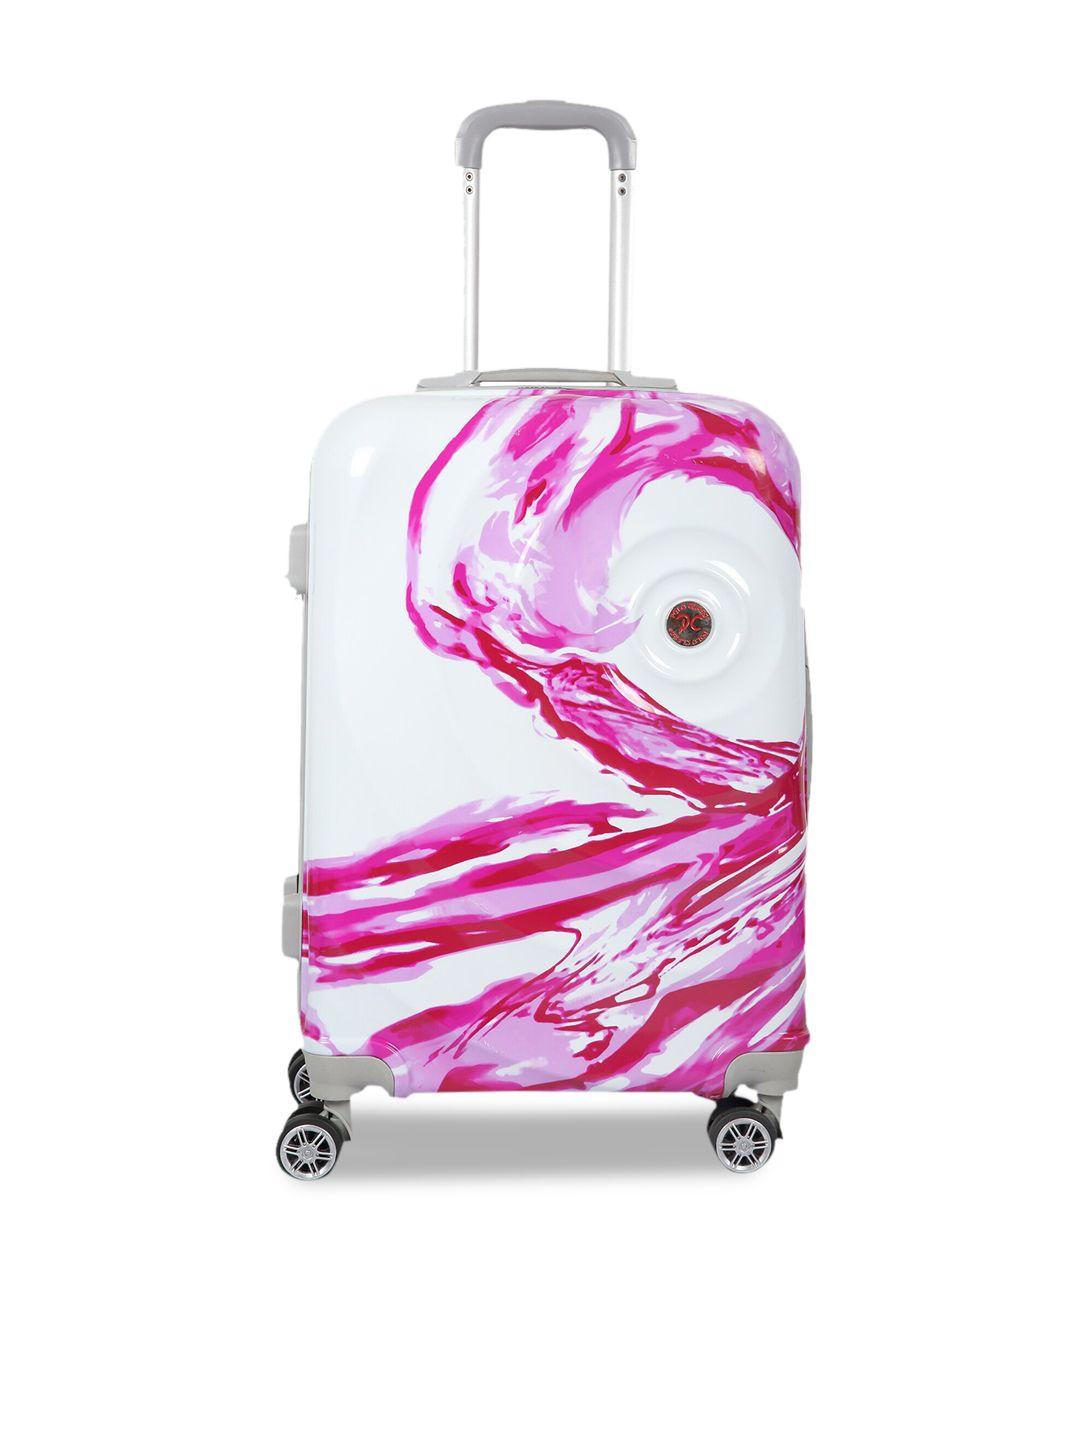 polo class pink & white printed hard-sided large trolley suitcase